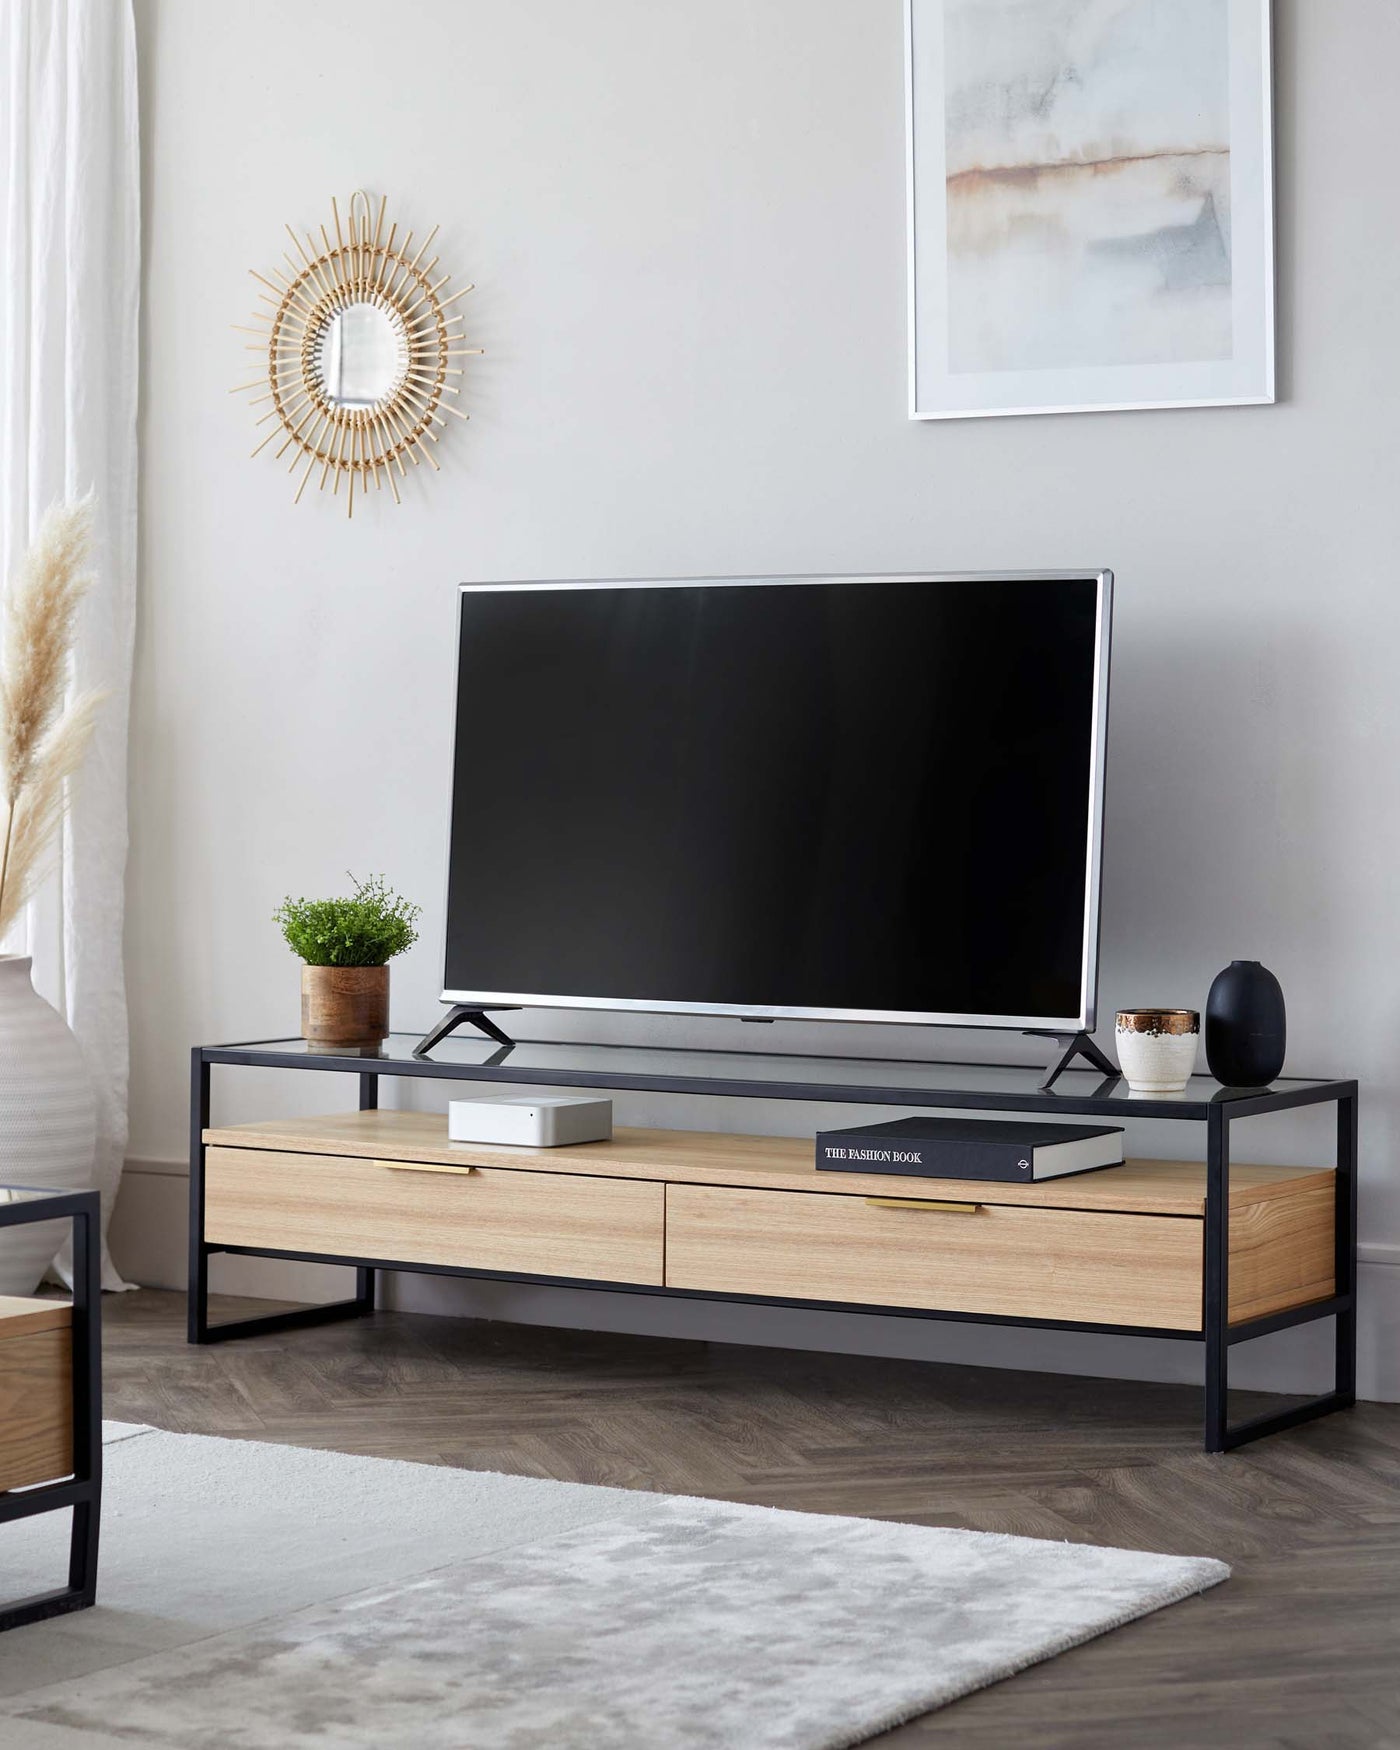 Modern minimalist TV stand with a sleek black metal frame and light wood drawers, featuring a spacious tabletop for electronic devices.